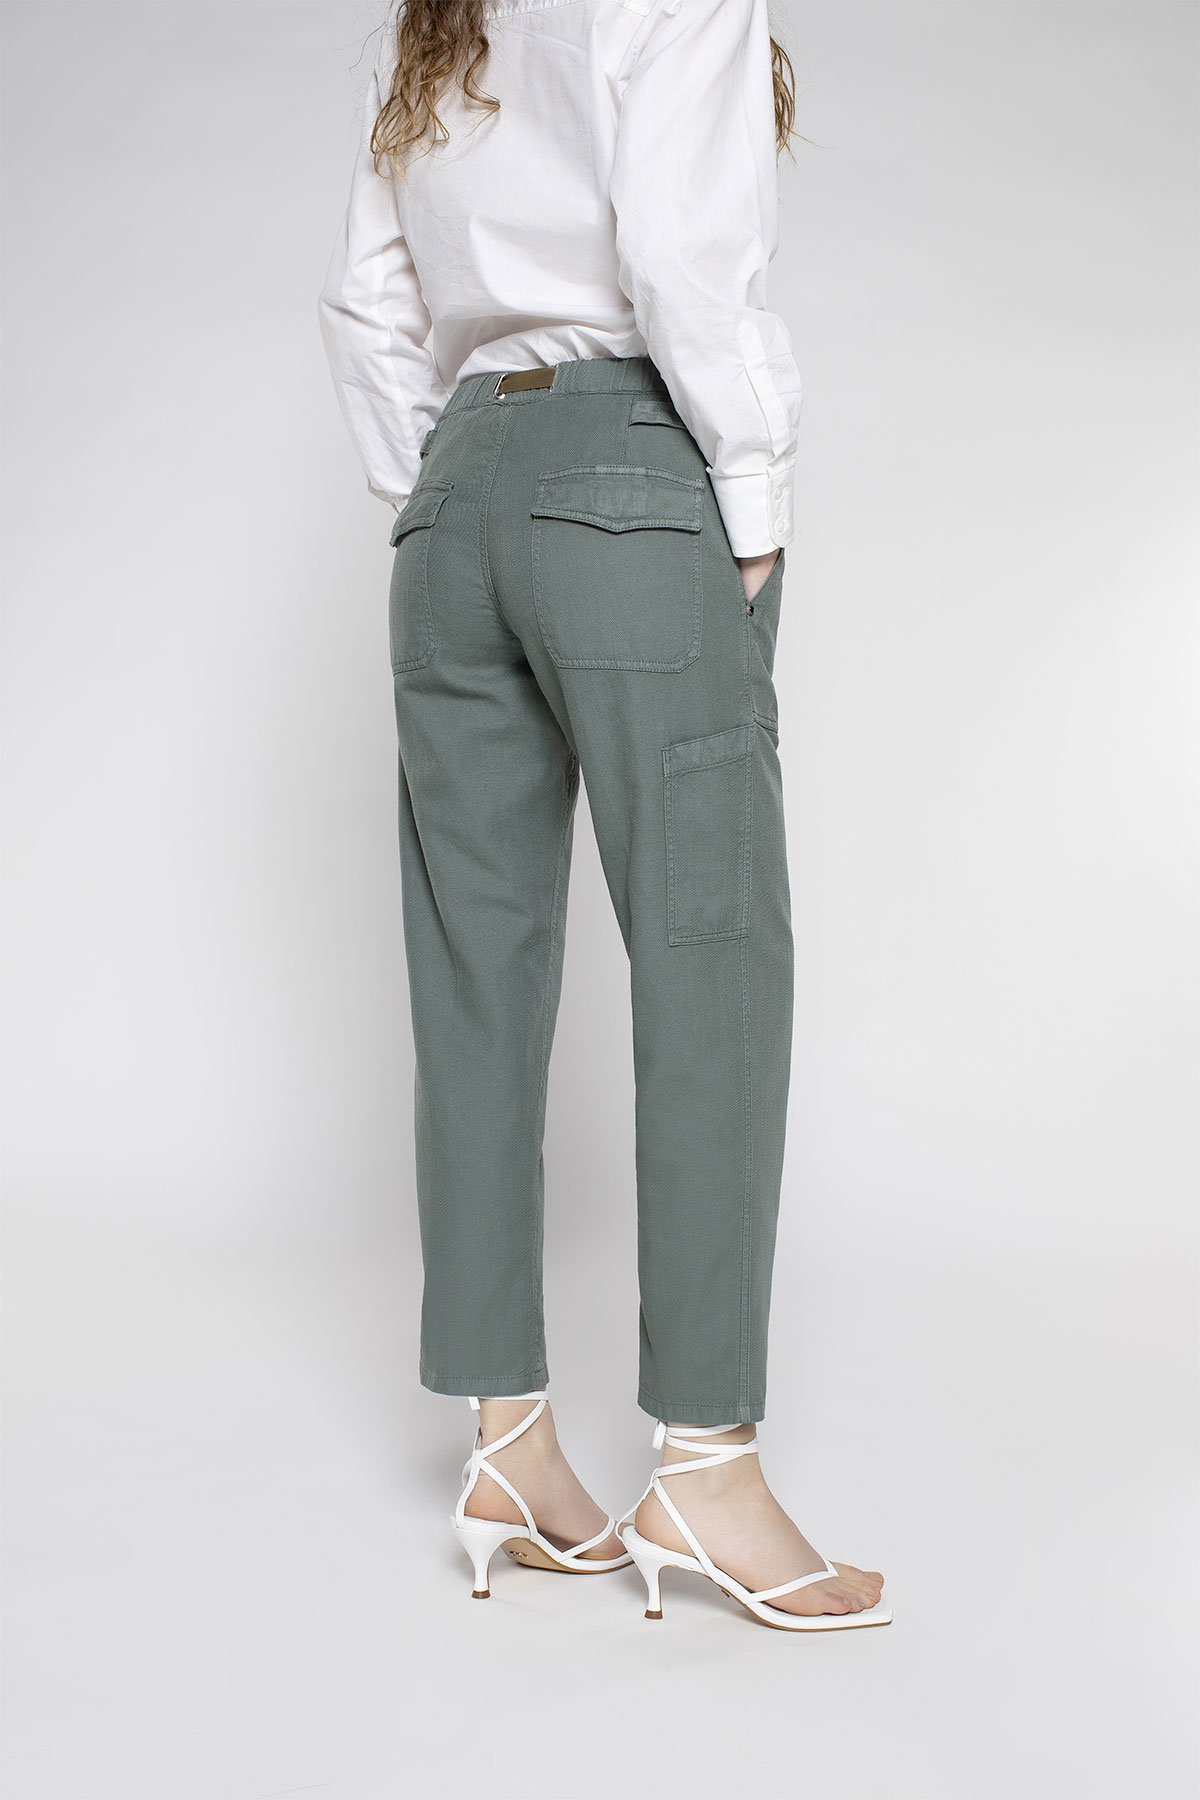 Teal Work Pants with Pockets - White Sand